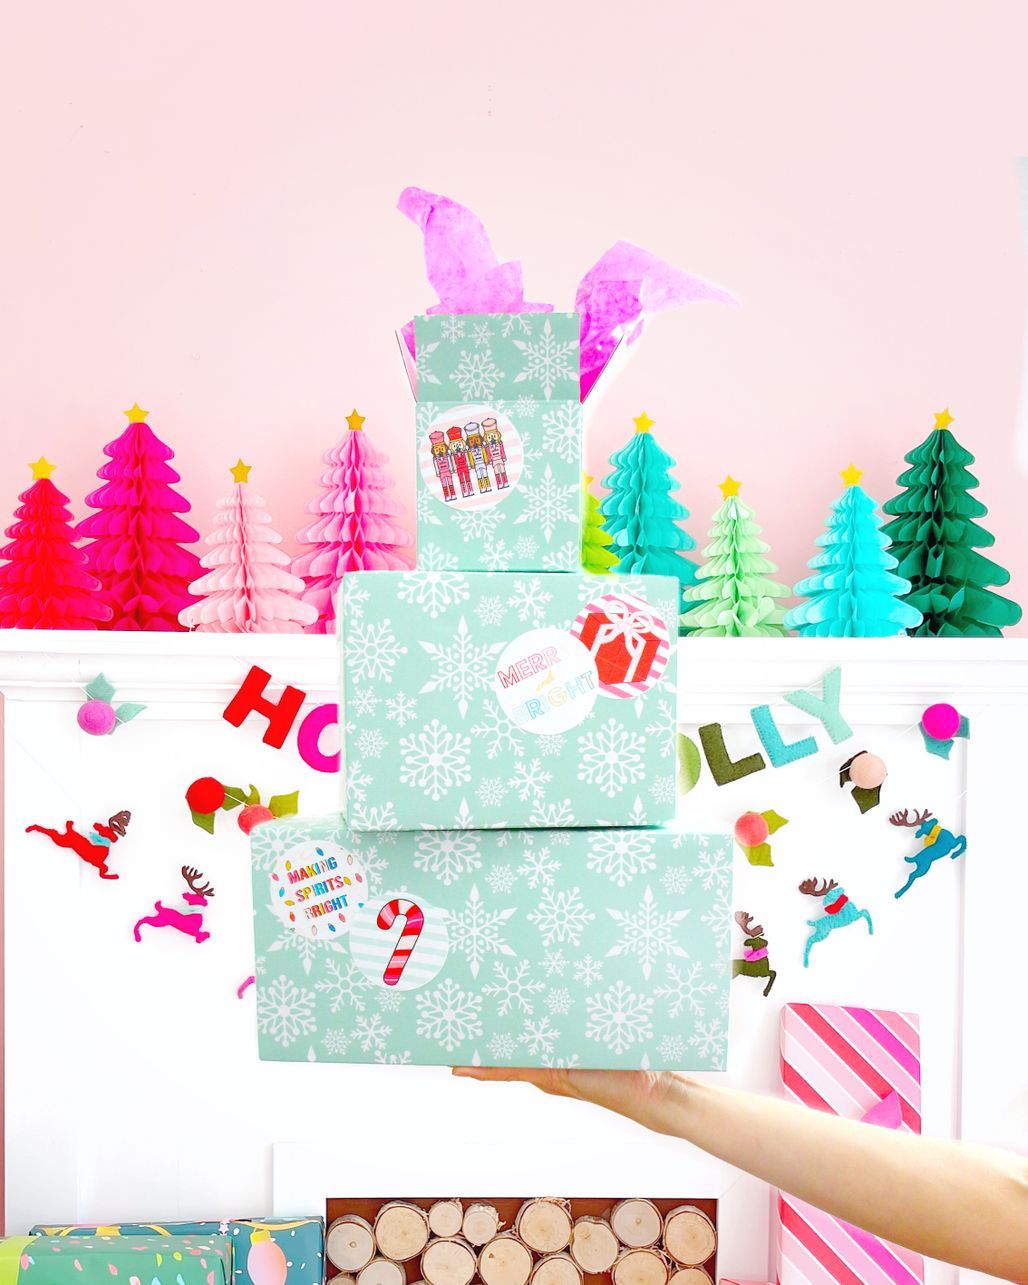 16 of the Most Creative Gift Wrapping Ideas - C.R.A.F.T.